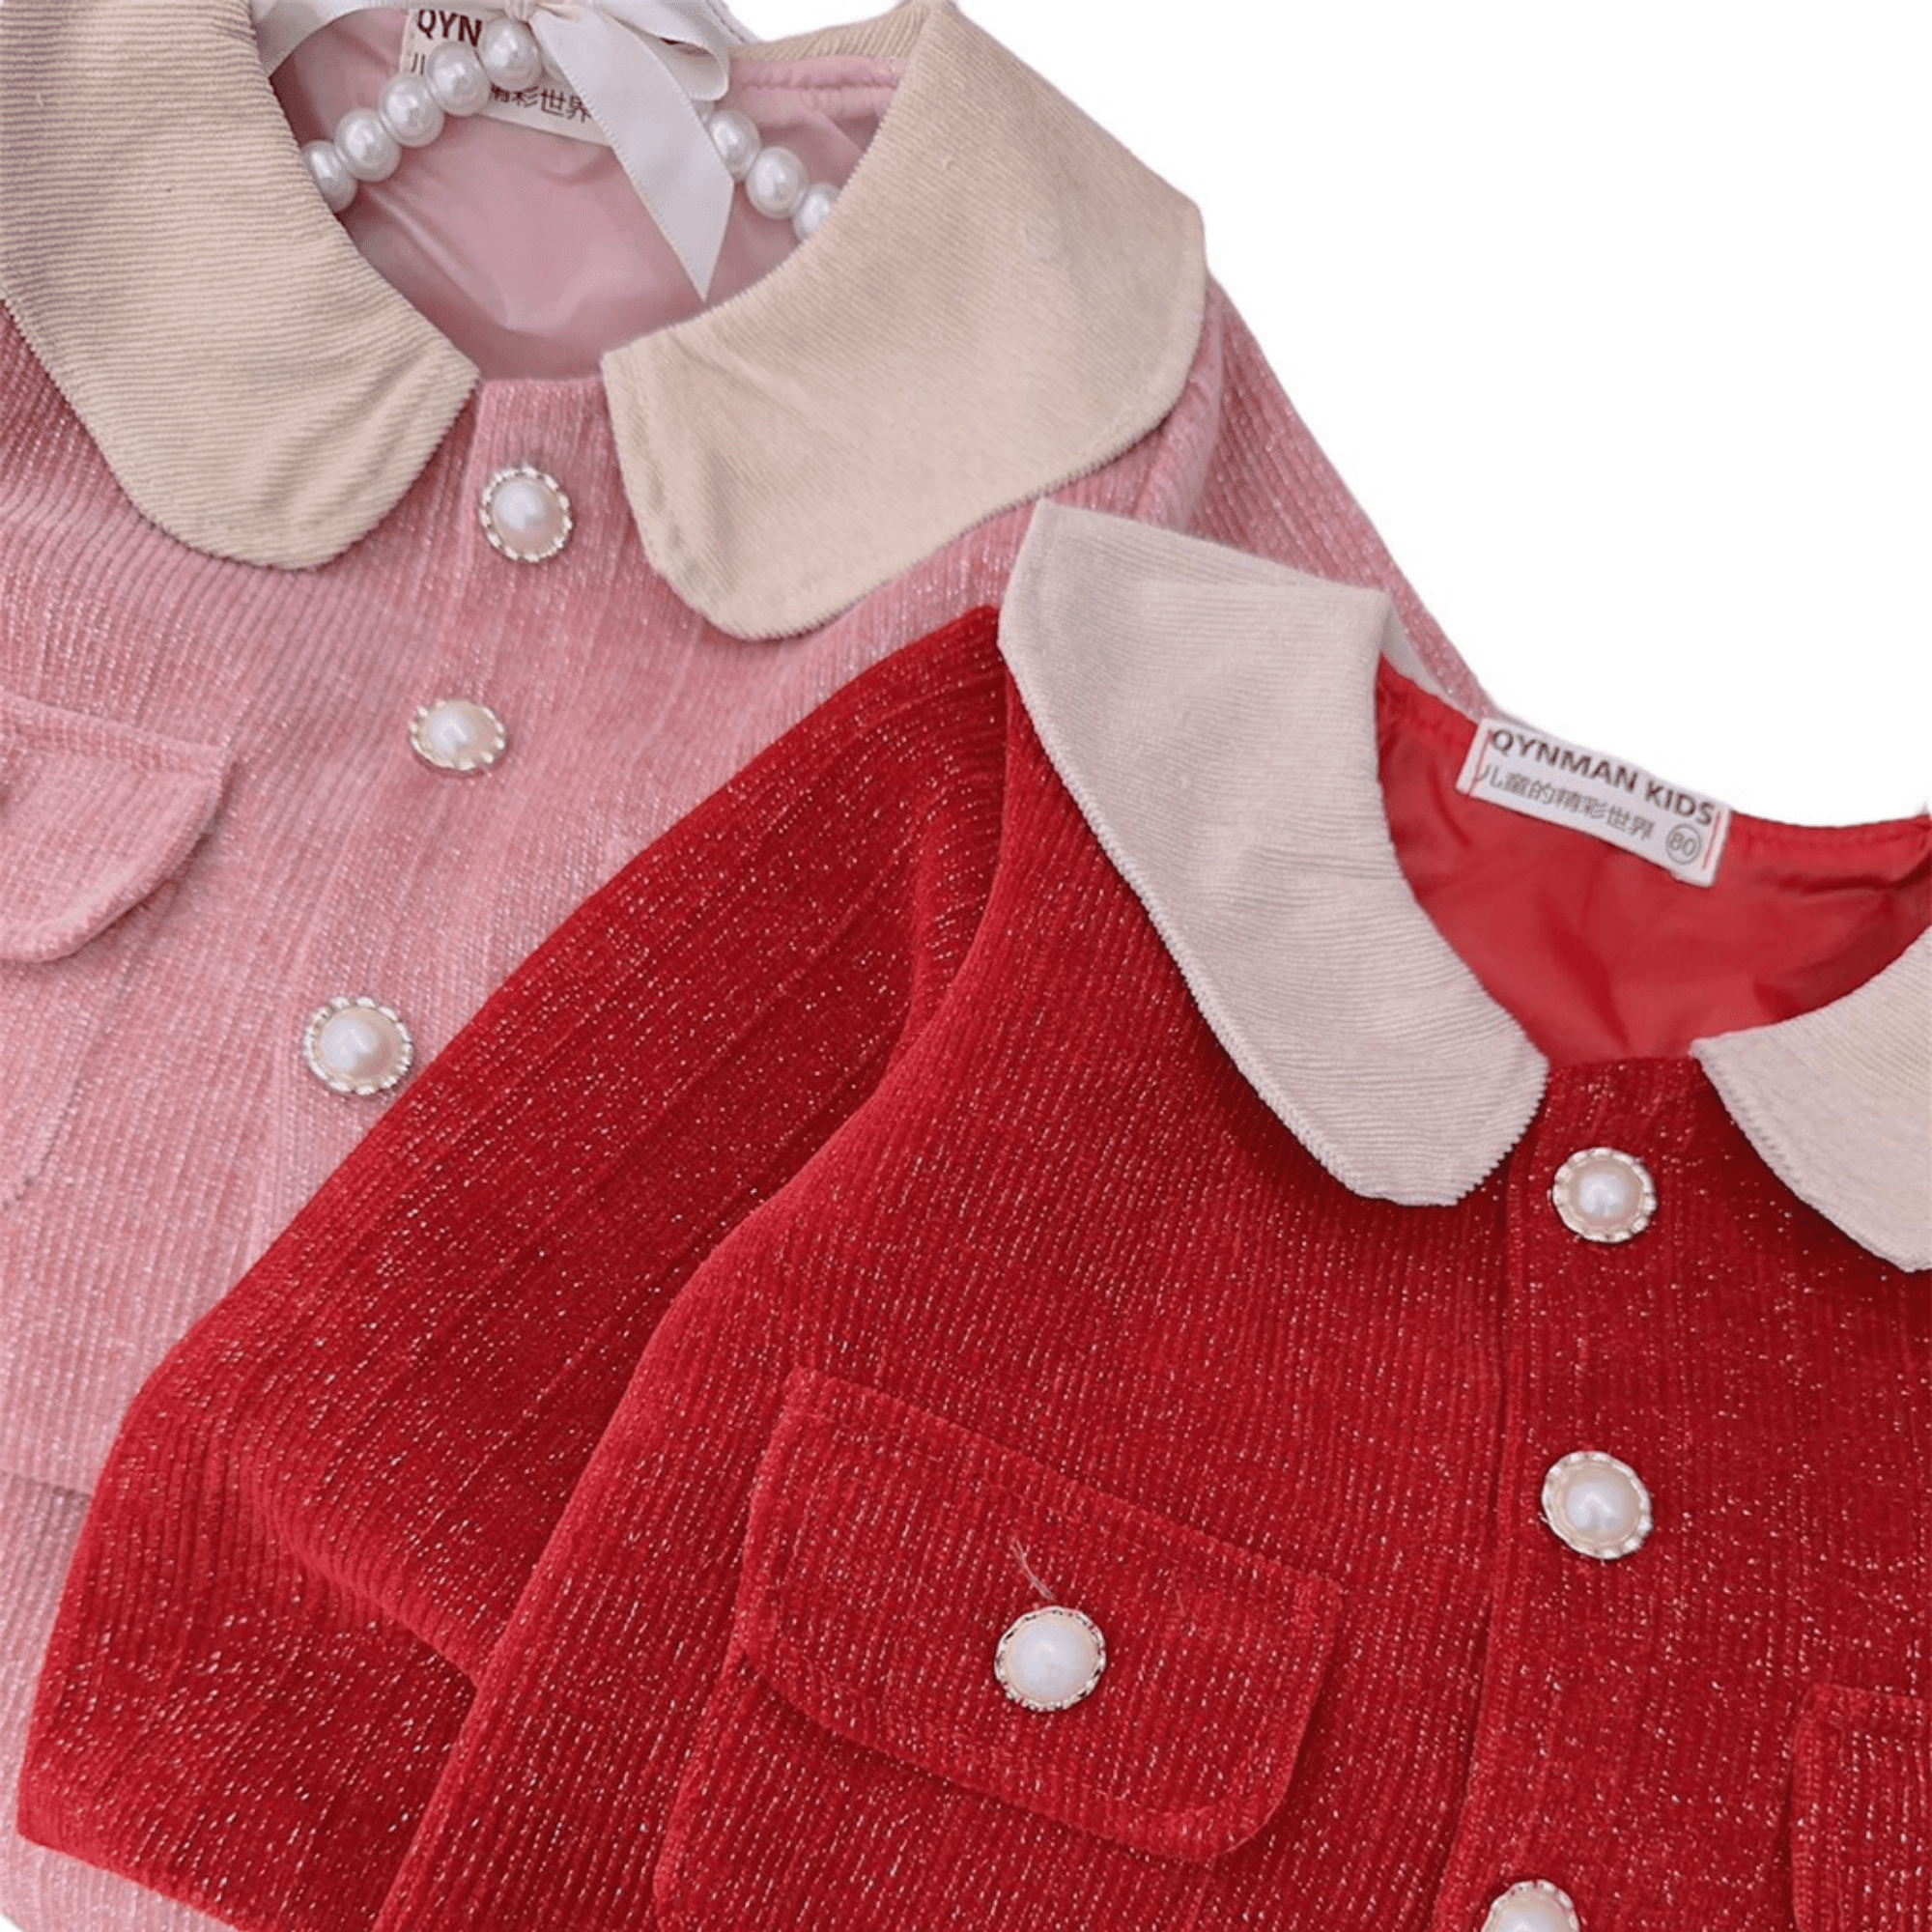 Clothes For Kids Girls Factory Price 100% Wool Dresses New Arrival Each One In Opp Bag Vietnam Manufacturer